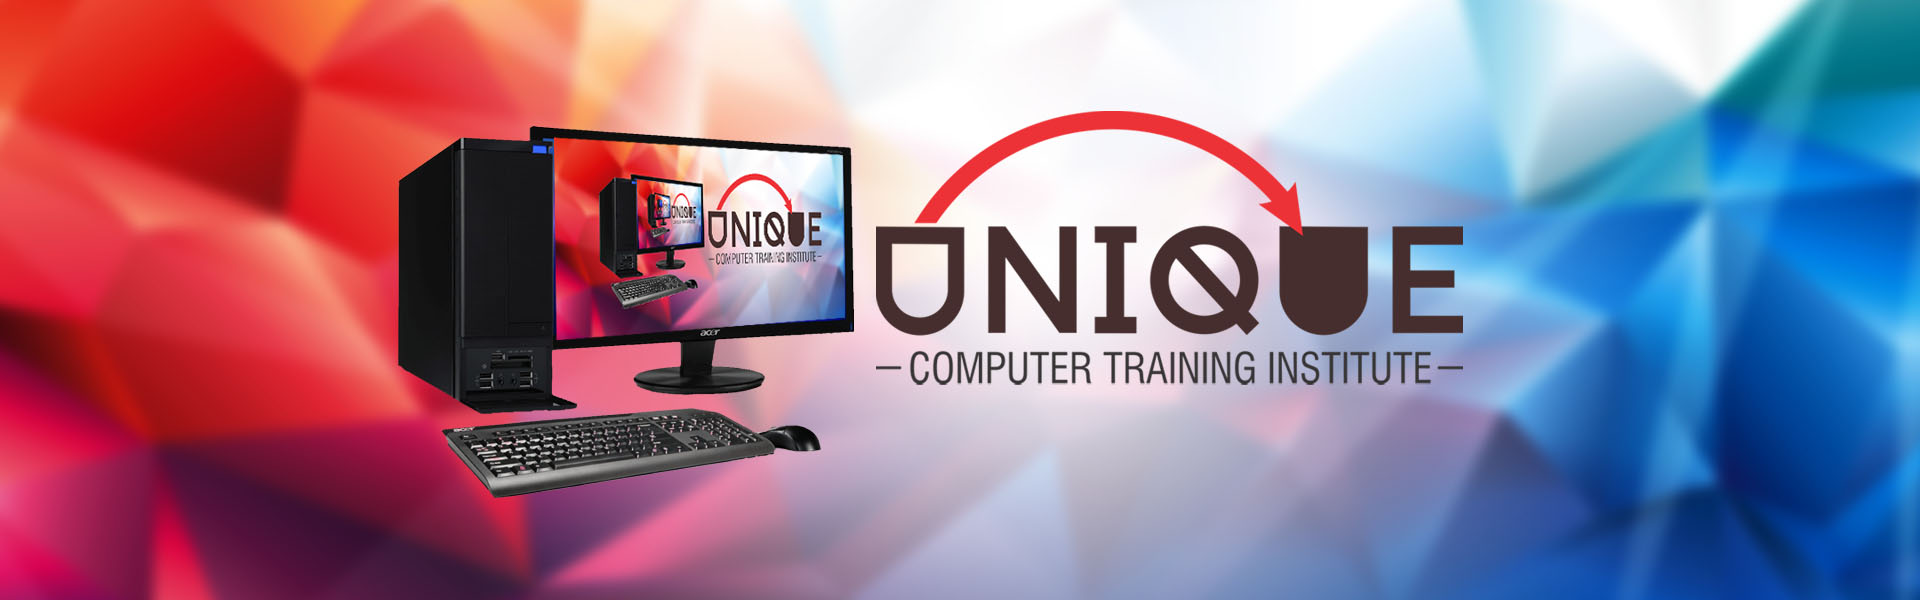 Unique Computer Training Center at Begur, Bangalore - Near Bommanahalli. We Offer above 75% discount on Fees who achieve above 75% score at final Exams. We also give job for course completed students.